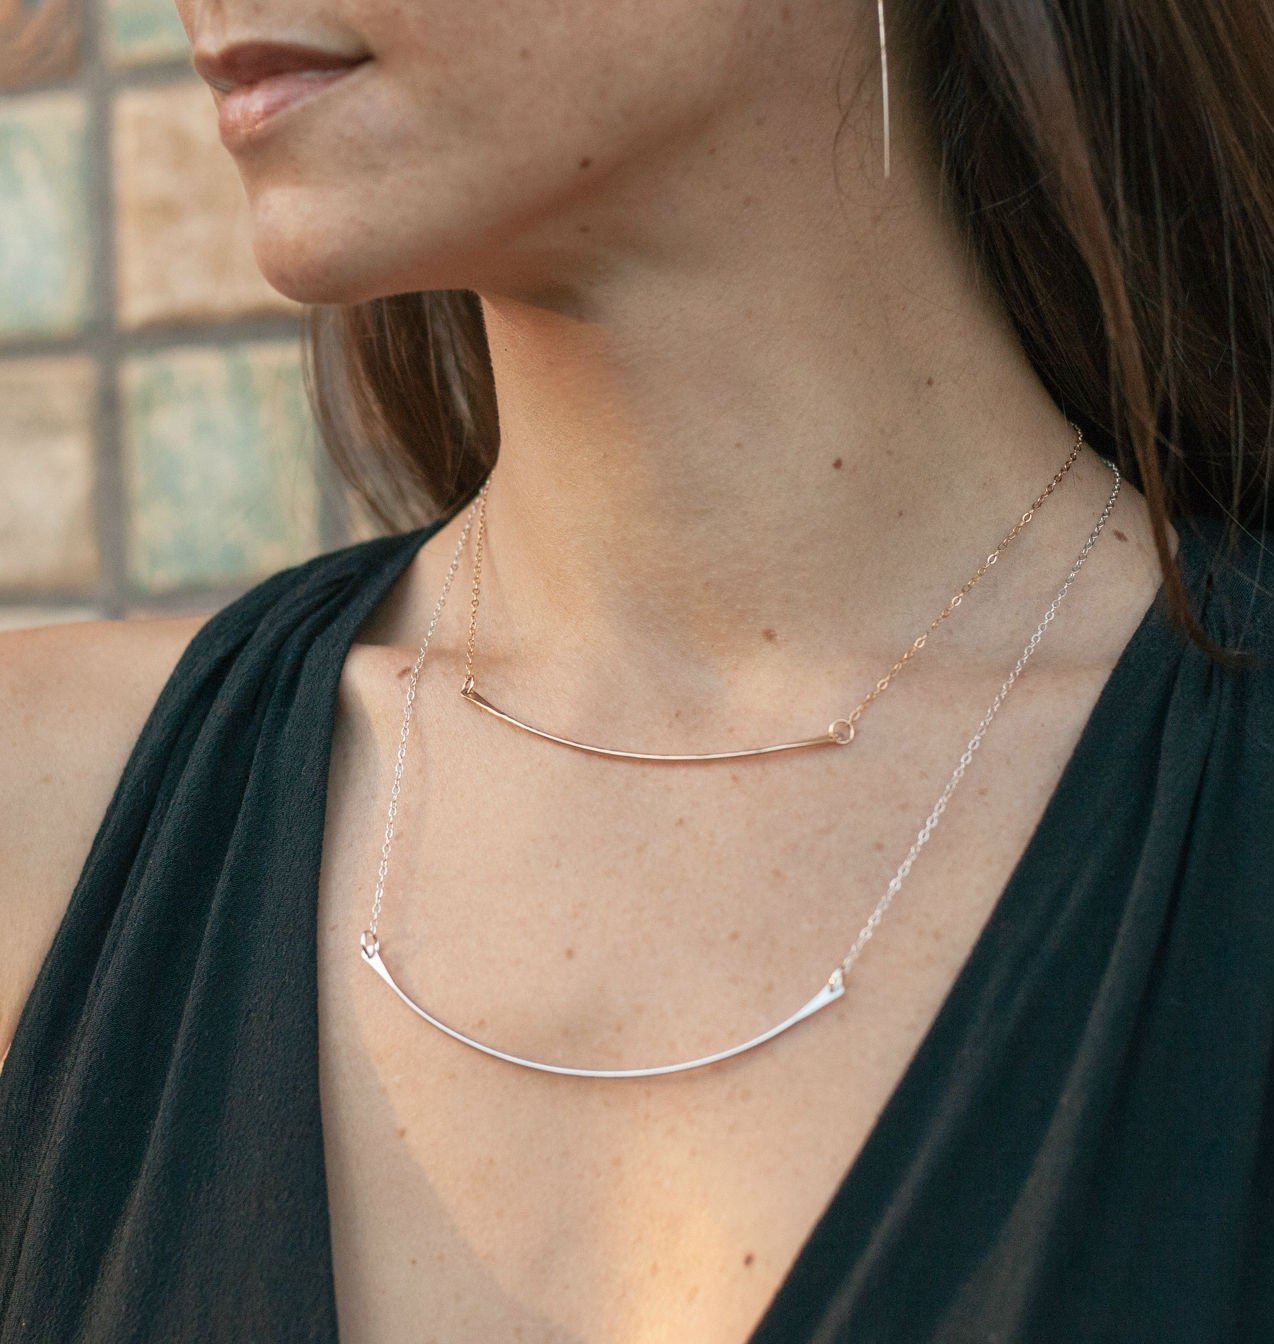 Curved Bar Necklace - Gold Bar Necklace - Layered Necklace - Minimalist Necklace - Dainty Necklace - Delicate Necklace - Choker Necklace - Fire + Mineral Jewelry